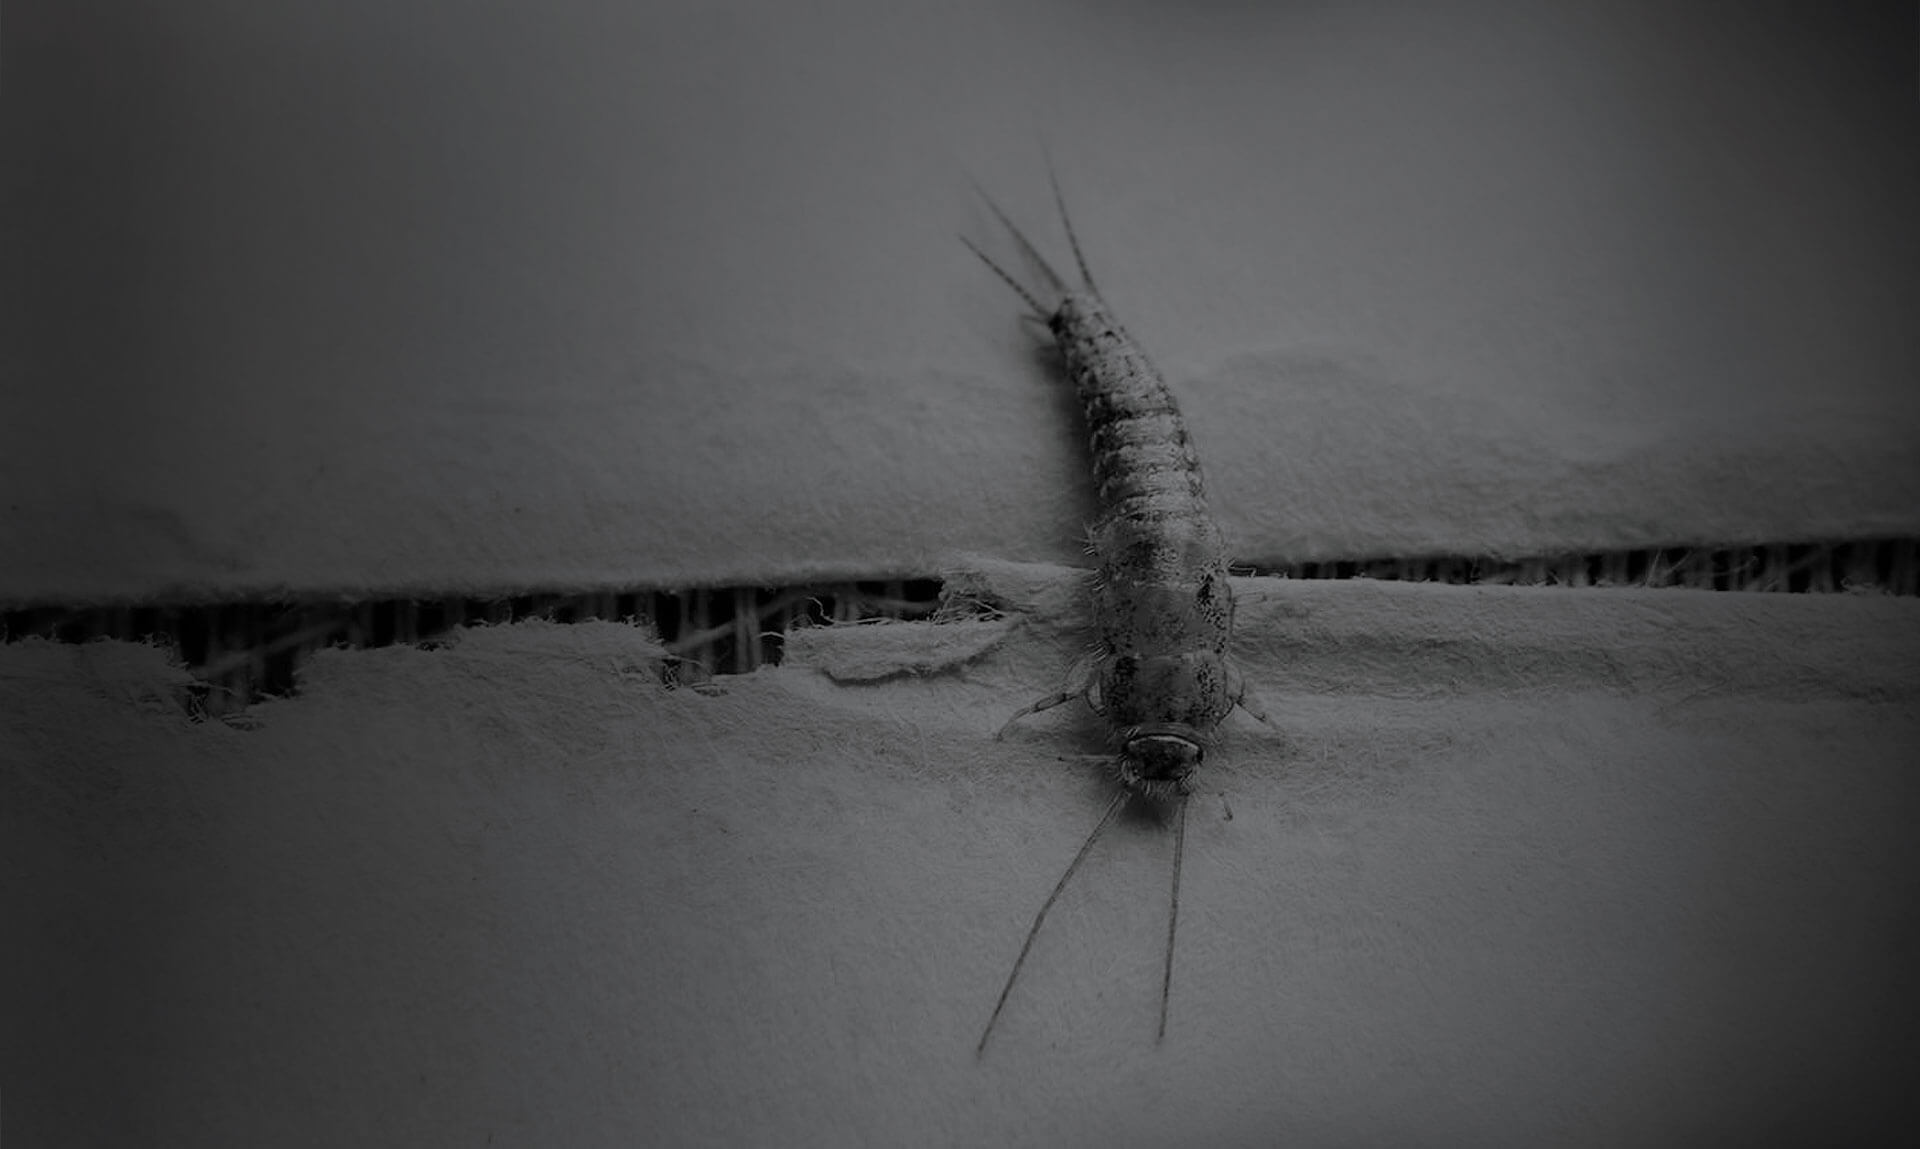 How to get rid of silverfish?